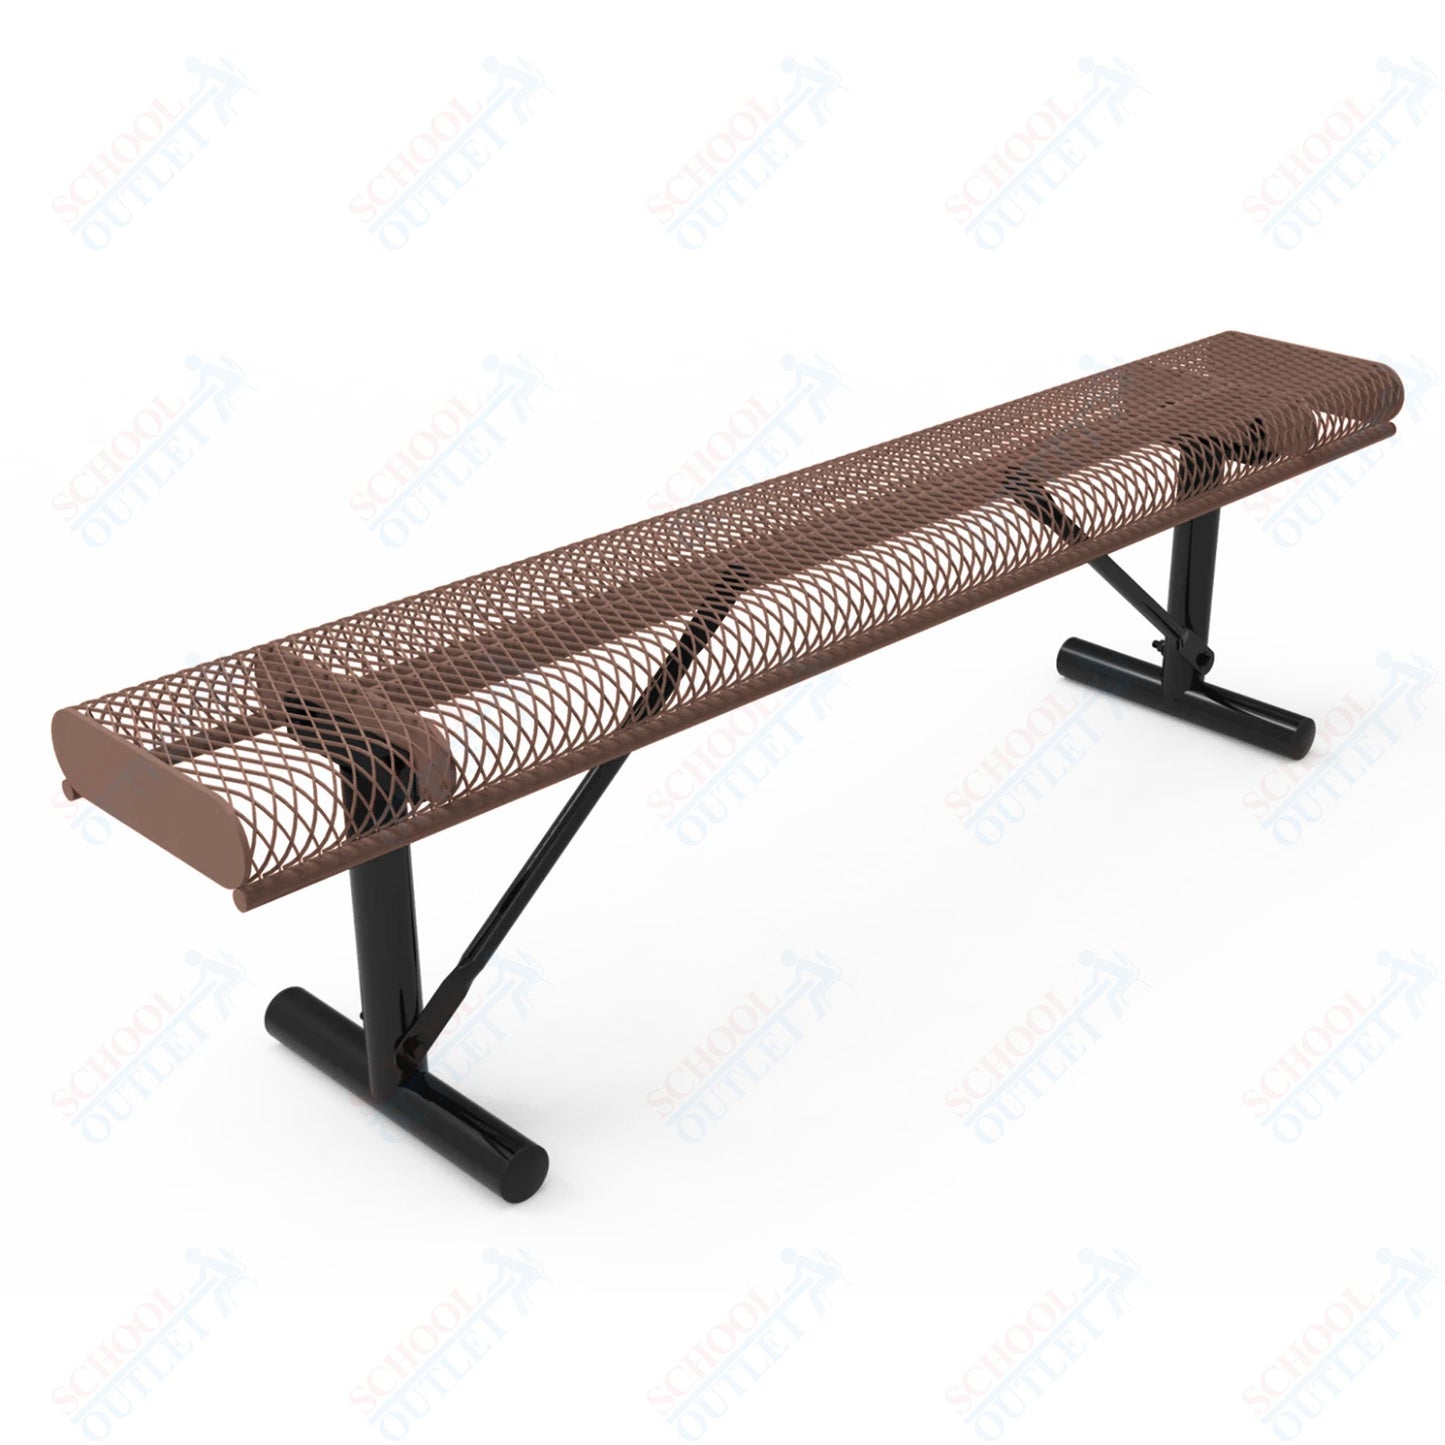 MyTcoat - Rolled Edges Outdoor Portable Bench without Back 4' L (MYT-BRE04-21)